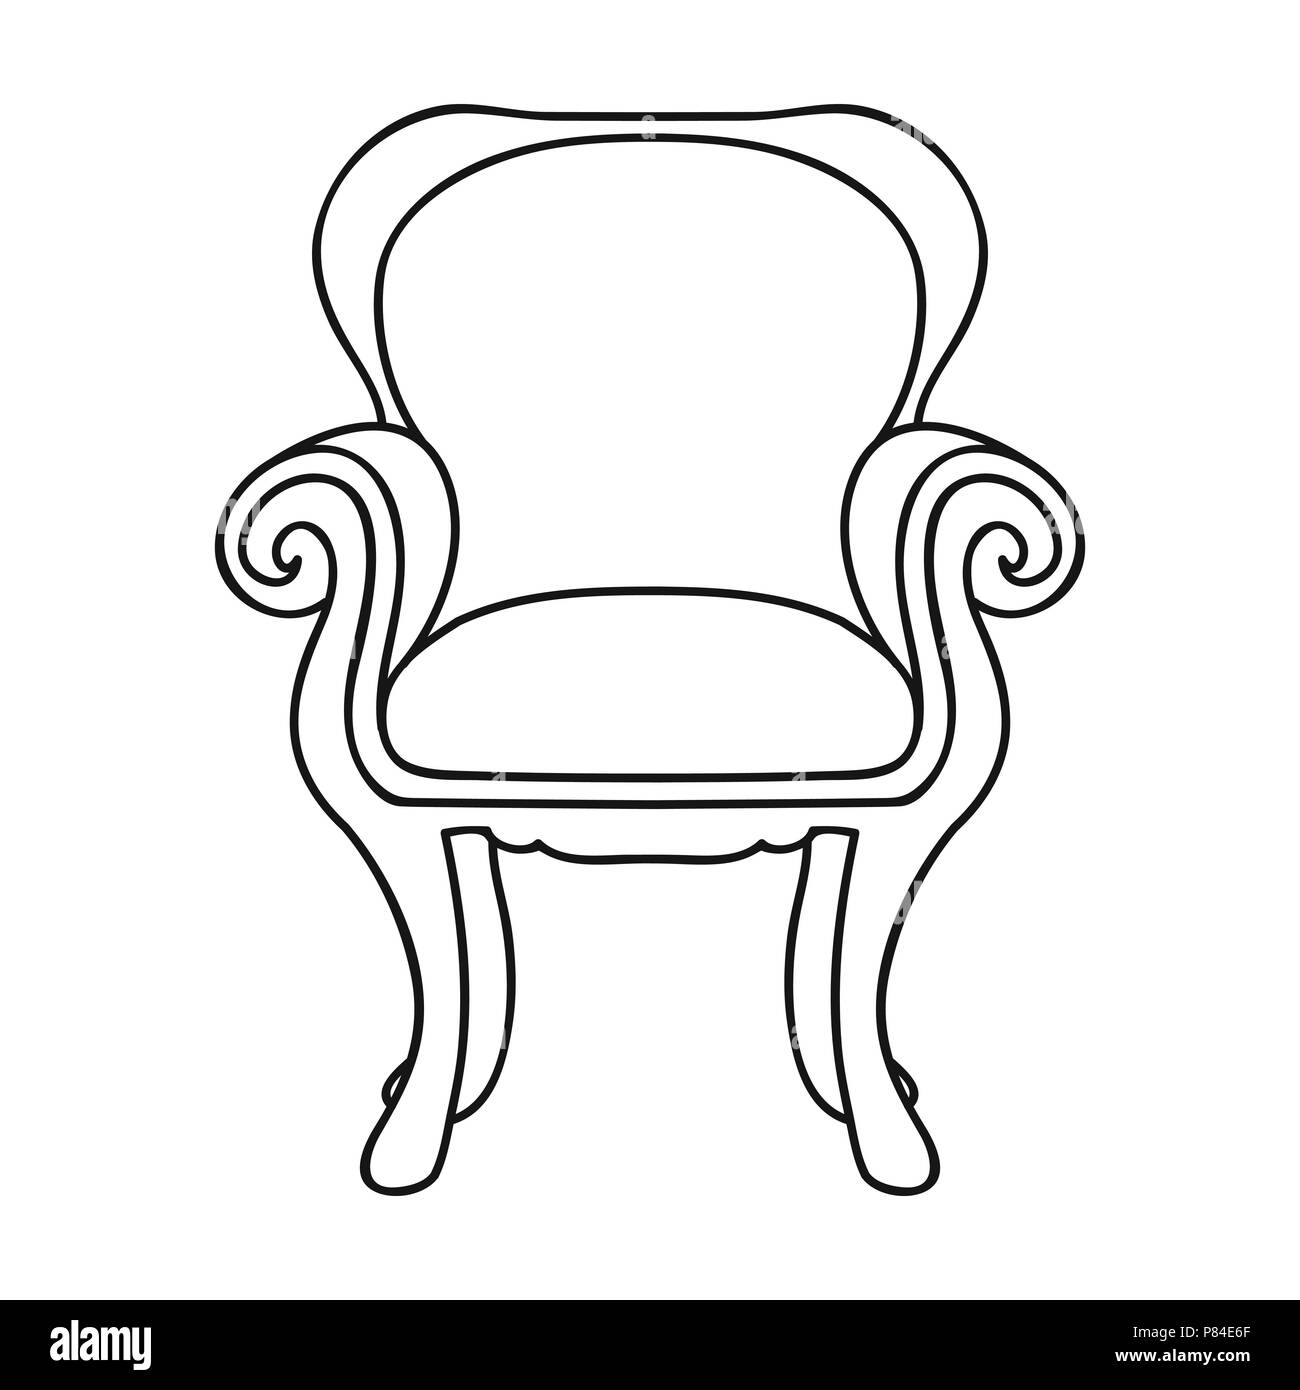 Wing-back chair icon in outline style isolated on white background. Furniture and home interior symbol vector illustration. Stock Vector